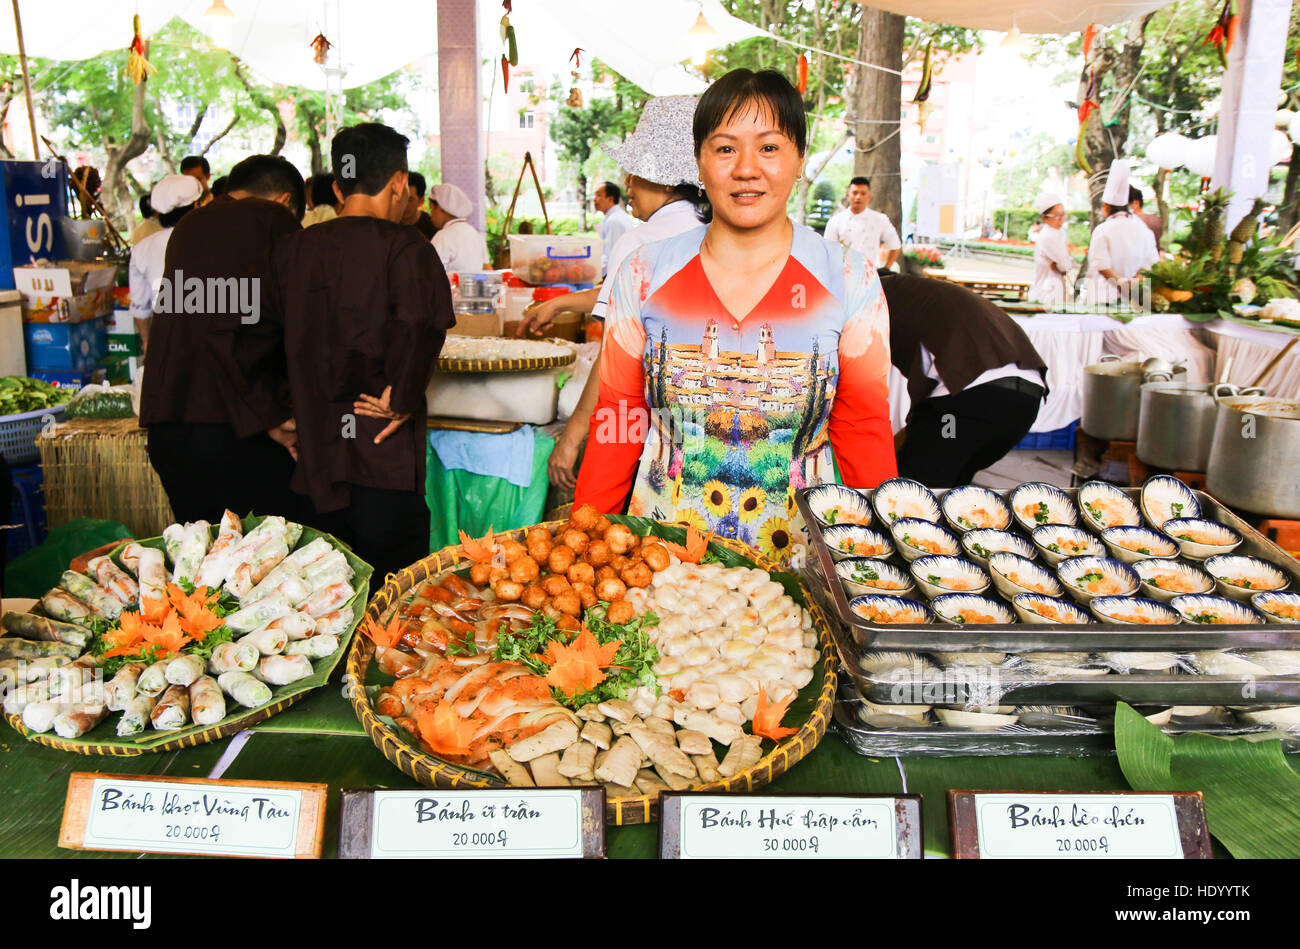 Ho Chi Minh City, Vietnam. 15th Dec, 2016. A staff introduces Vietnamse traditional dishes during the Ho Chi Minh City International Food Festival 2016 in Ho Chi Minh City, Vietnam, Dec. 15, 2016. The Ho Chi Minh City International Food Festival 2016, held from Dec. 15 to 18, is showcasing special dishes from 18 countries and territories with a total of 150 booths. A wide range of activities, including a cooking contest, a gastronomy photo exhibition, bartender demonstrations and music shows will also be held during the event. © Hoang Thi Huong/Xinhua/Alamy Live News Stock Photo